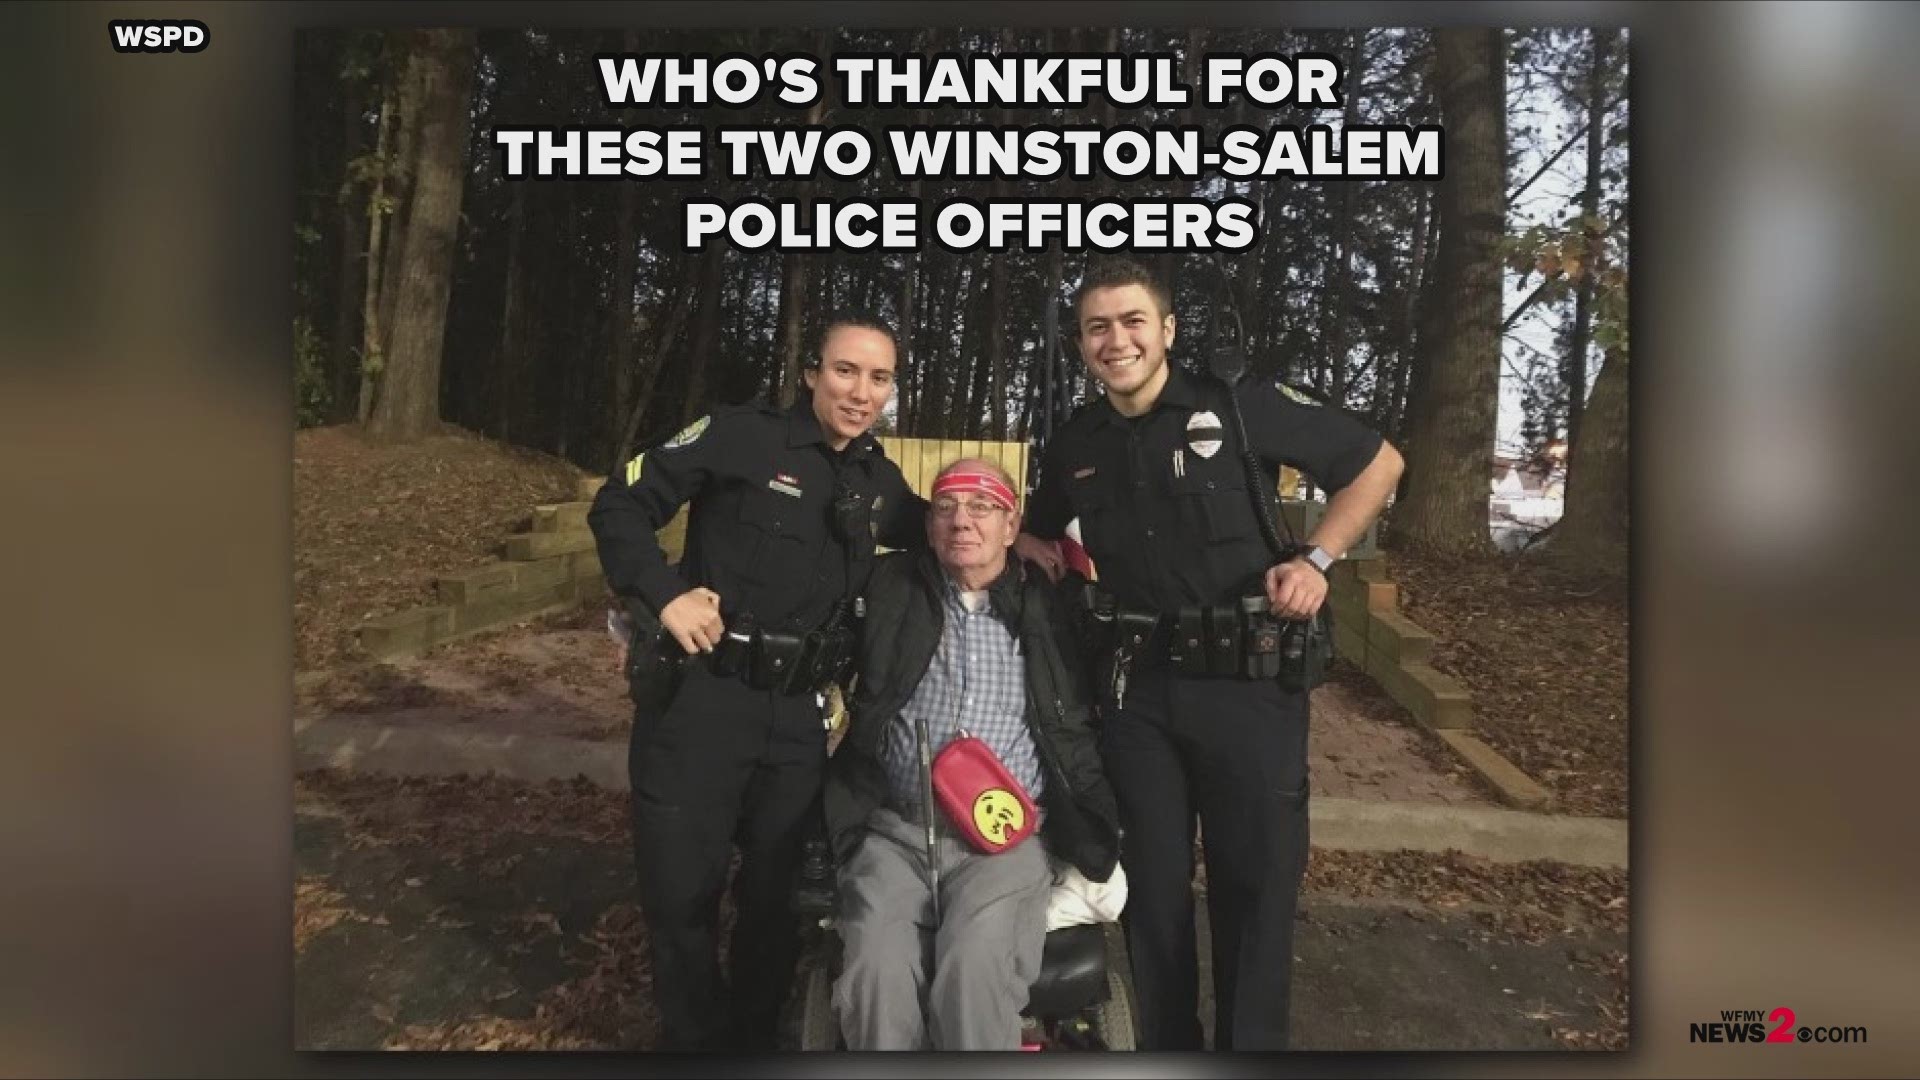 Winston-Salem Police officers push Navy Veteran, David Lane down the road after his electric wheelchair broke down. Way to go officers!